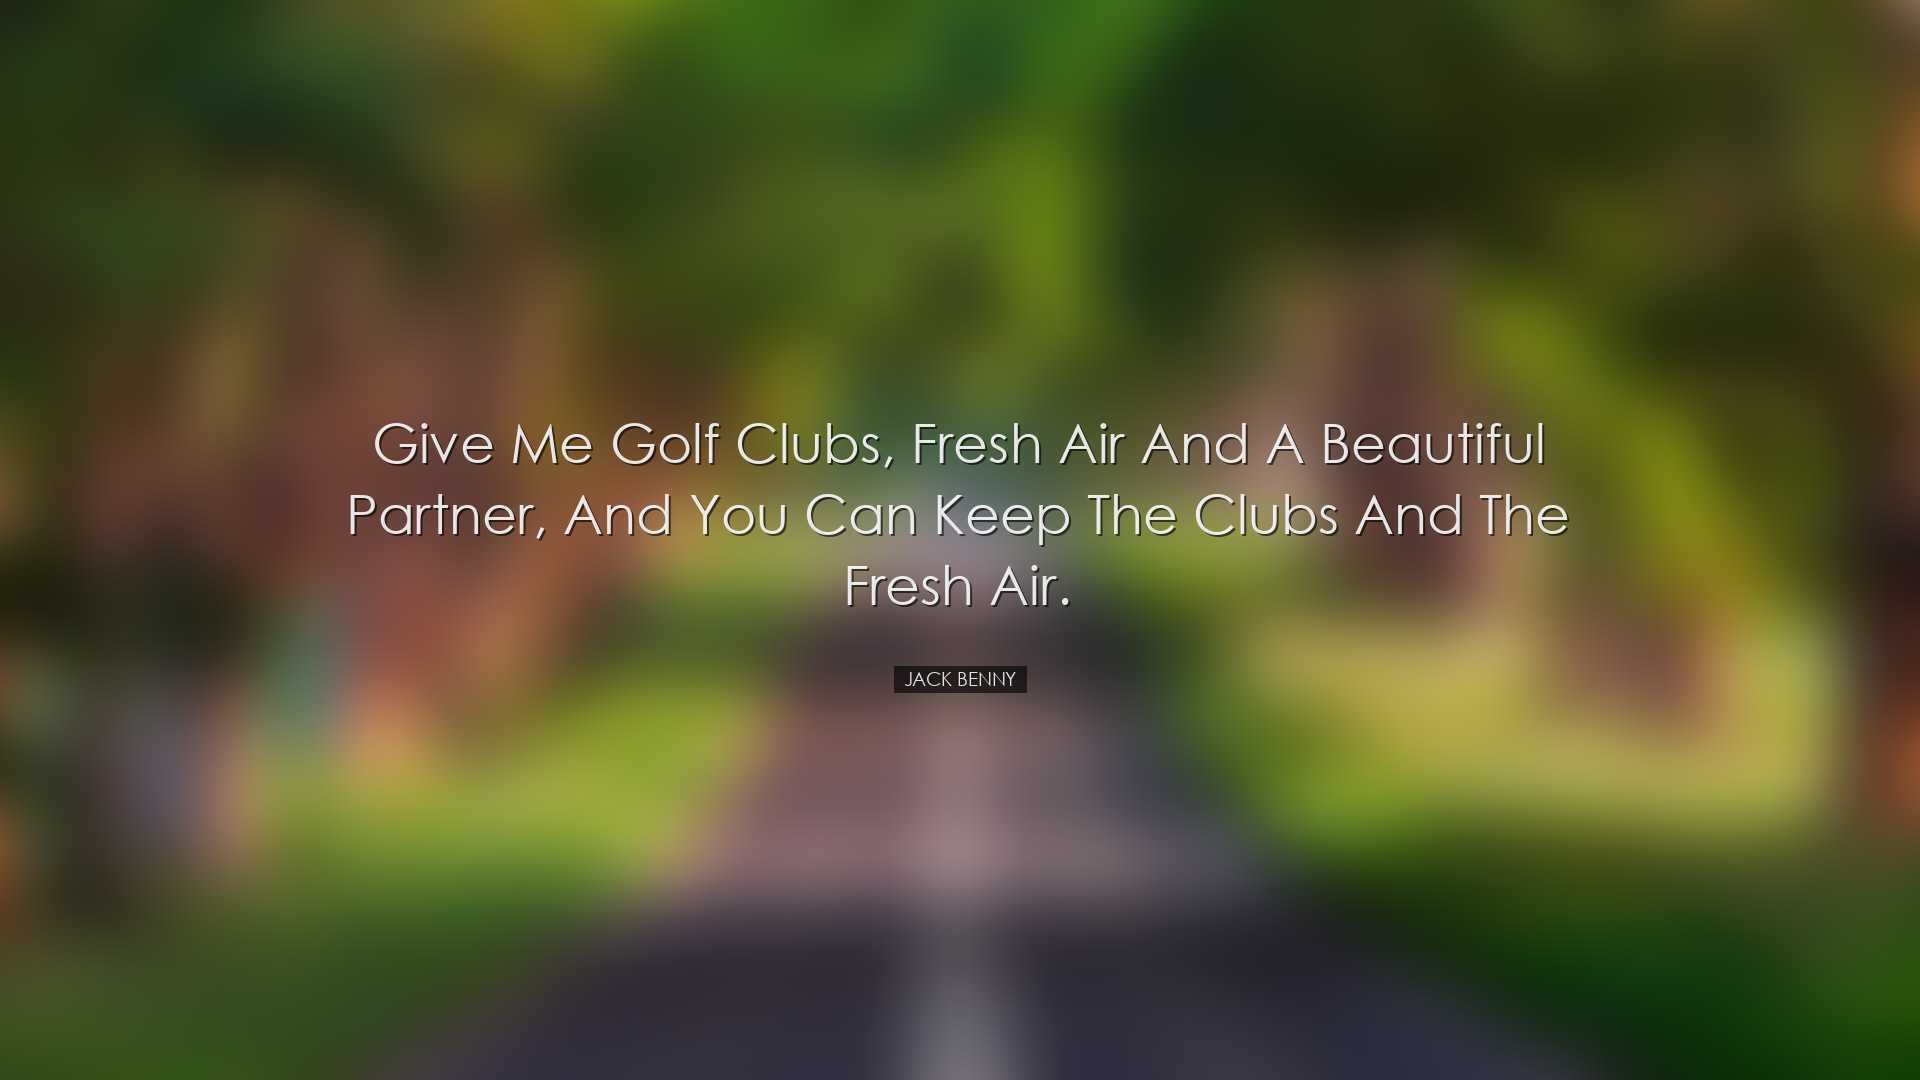 Give me golf clubs, fresh air and a beautiful partner, and you can